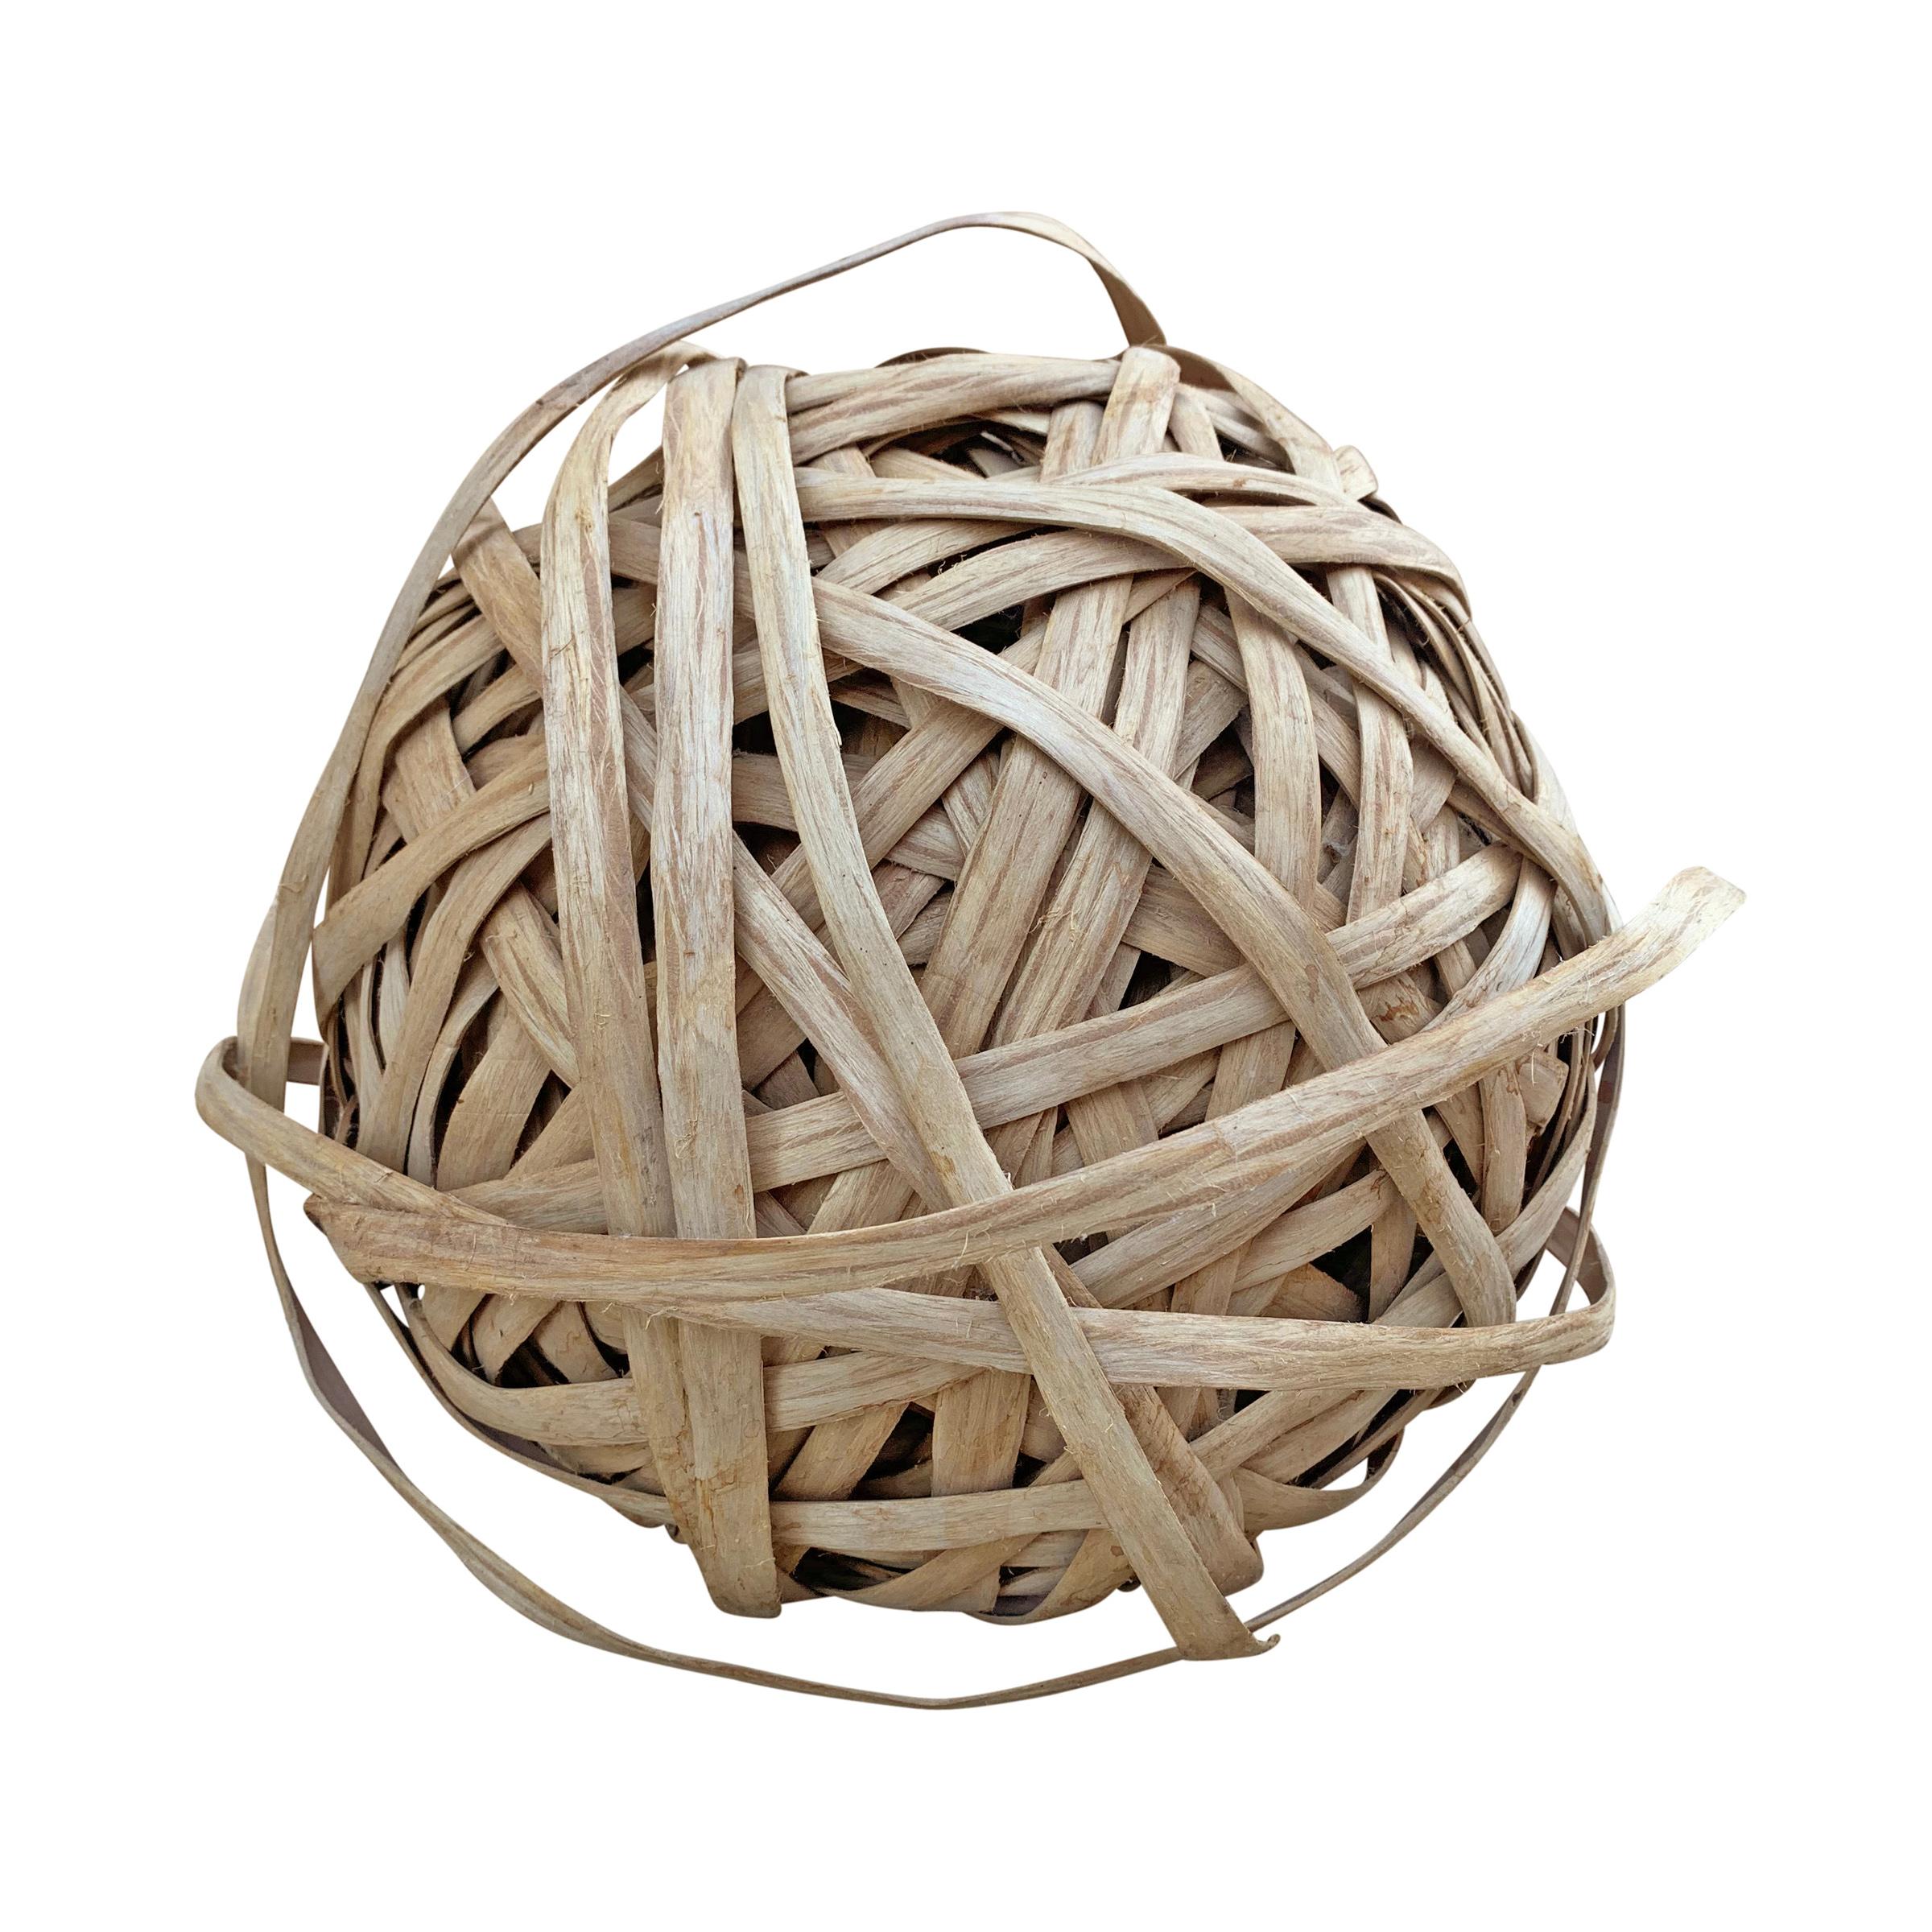 A wildly sculptural sphere made from oak splints used for making baskets. Acquired from a woman who made baskets, the splints have been woven into a sphere, possibly for storage purposes, but possibly on purpose to create a sculpture. Your guess is